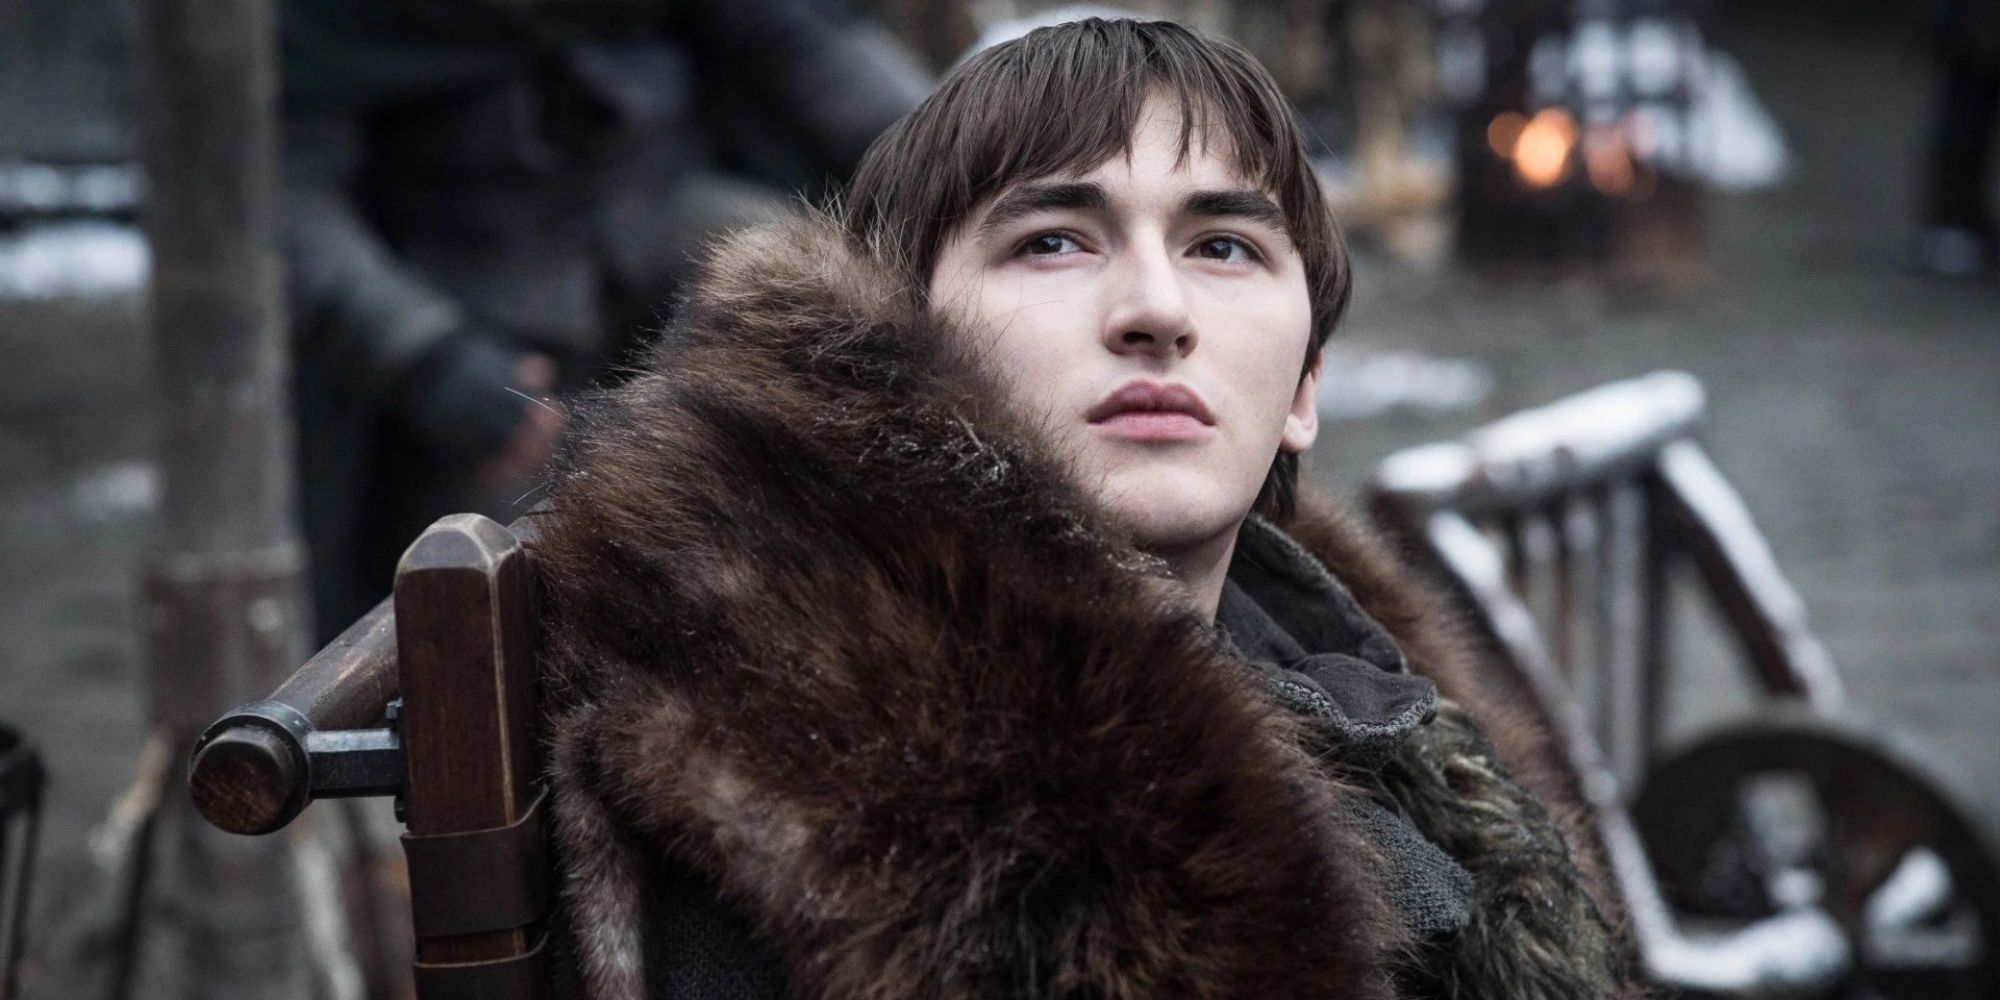 Isaac Hempstead Wright as Bran Stark looking up at something in HBO's 'Game of Thrones.'